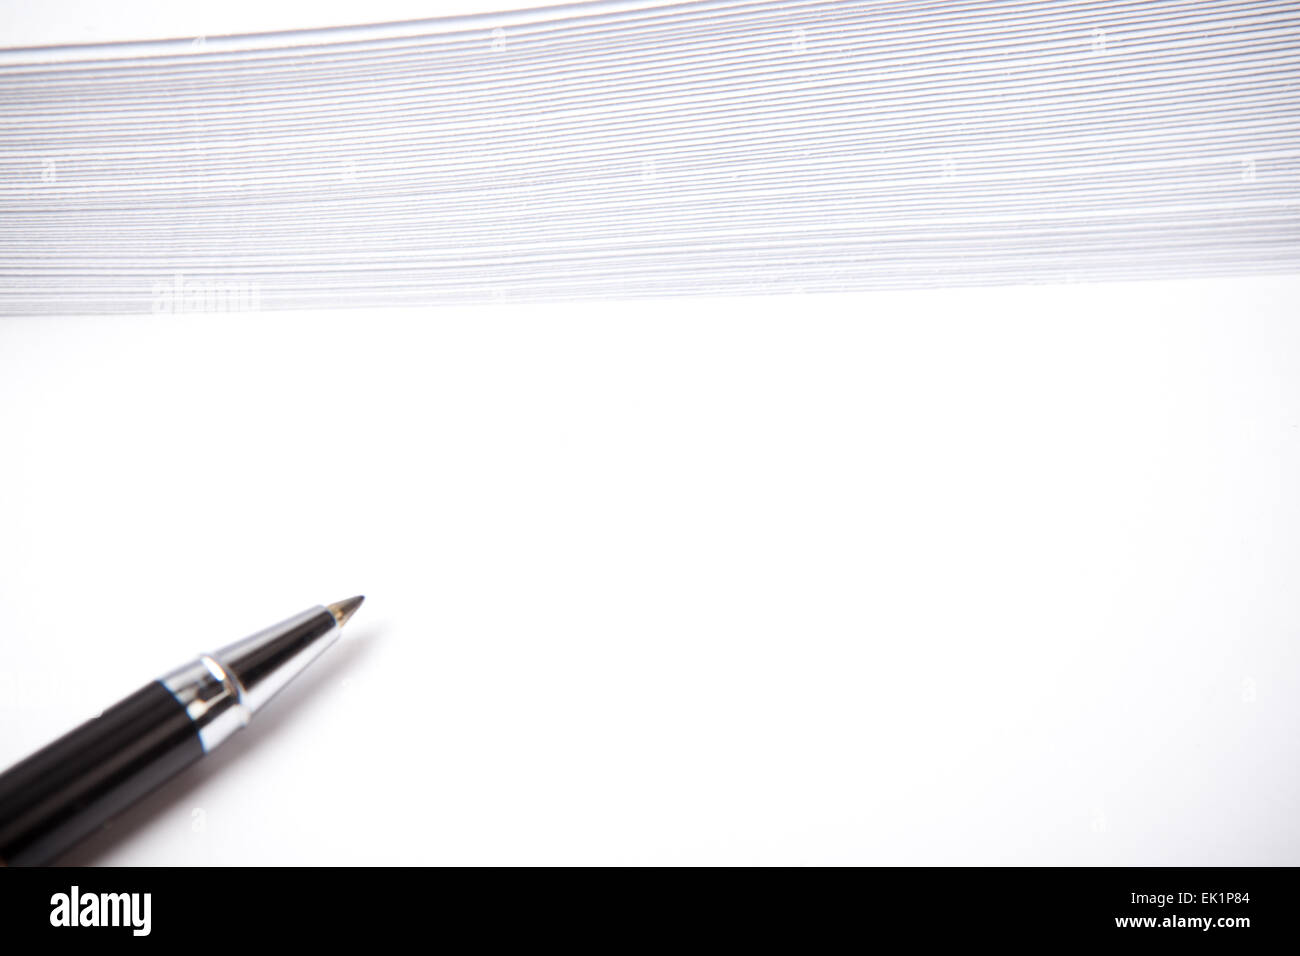 white paper with free space for sample text, envelopes in background, pen beside Stock Photo